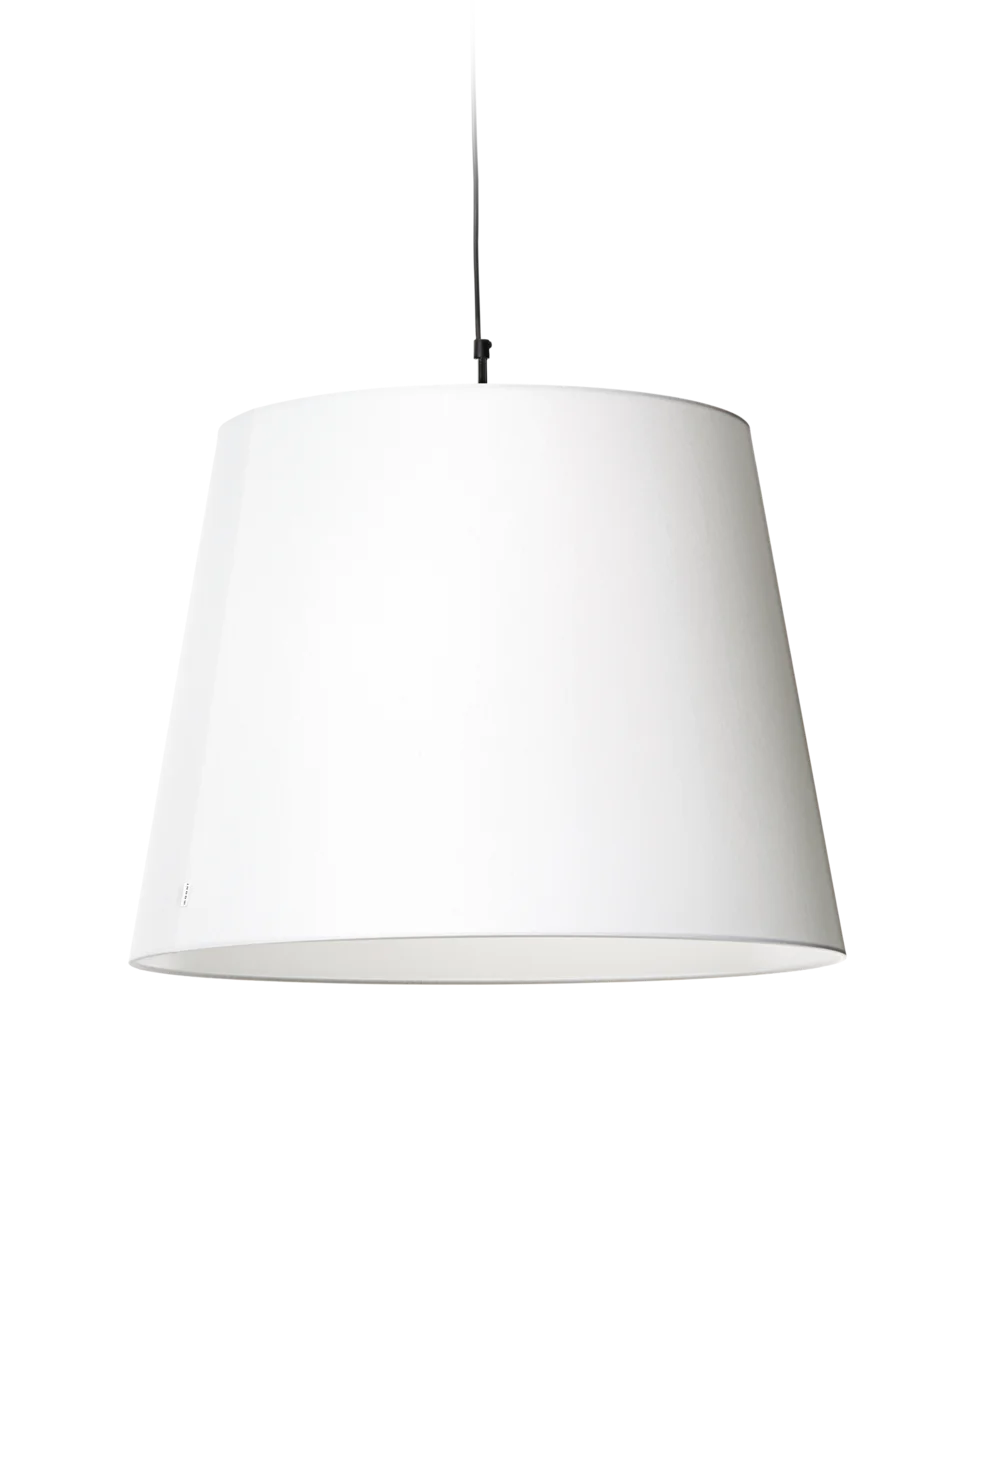 Hang suspension light front view